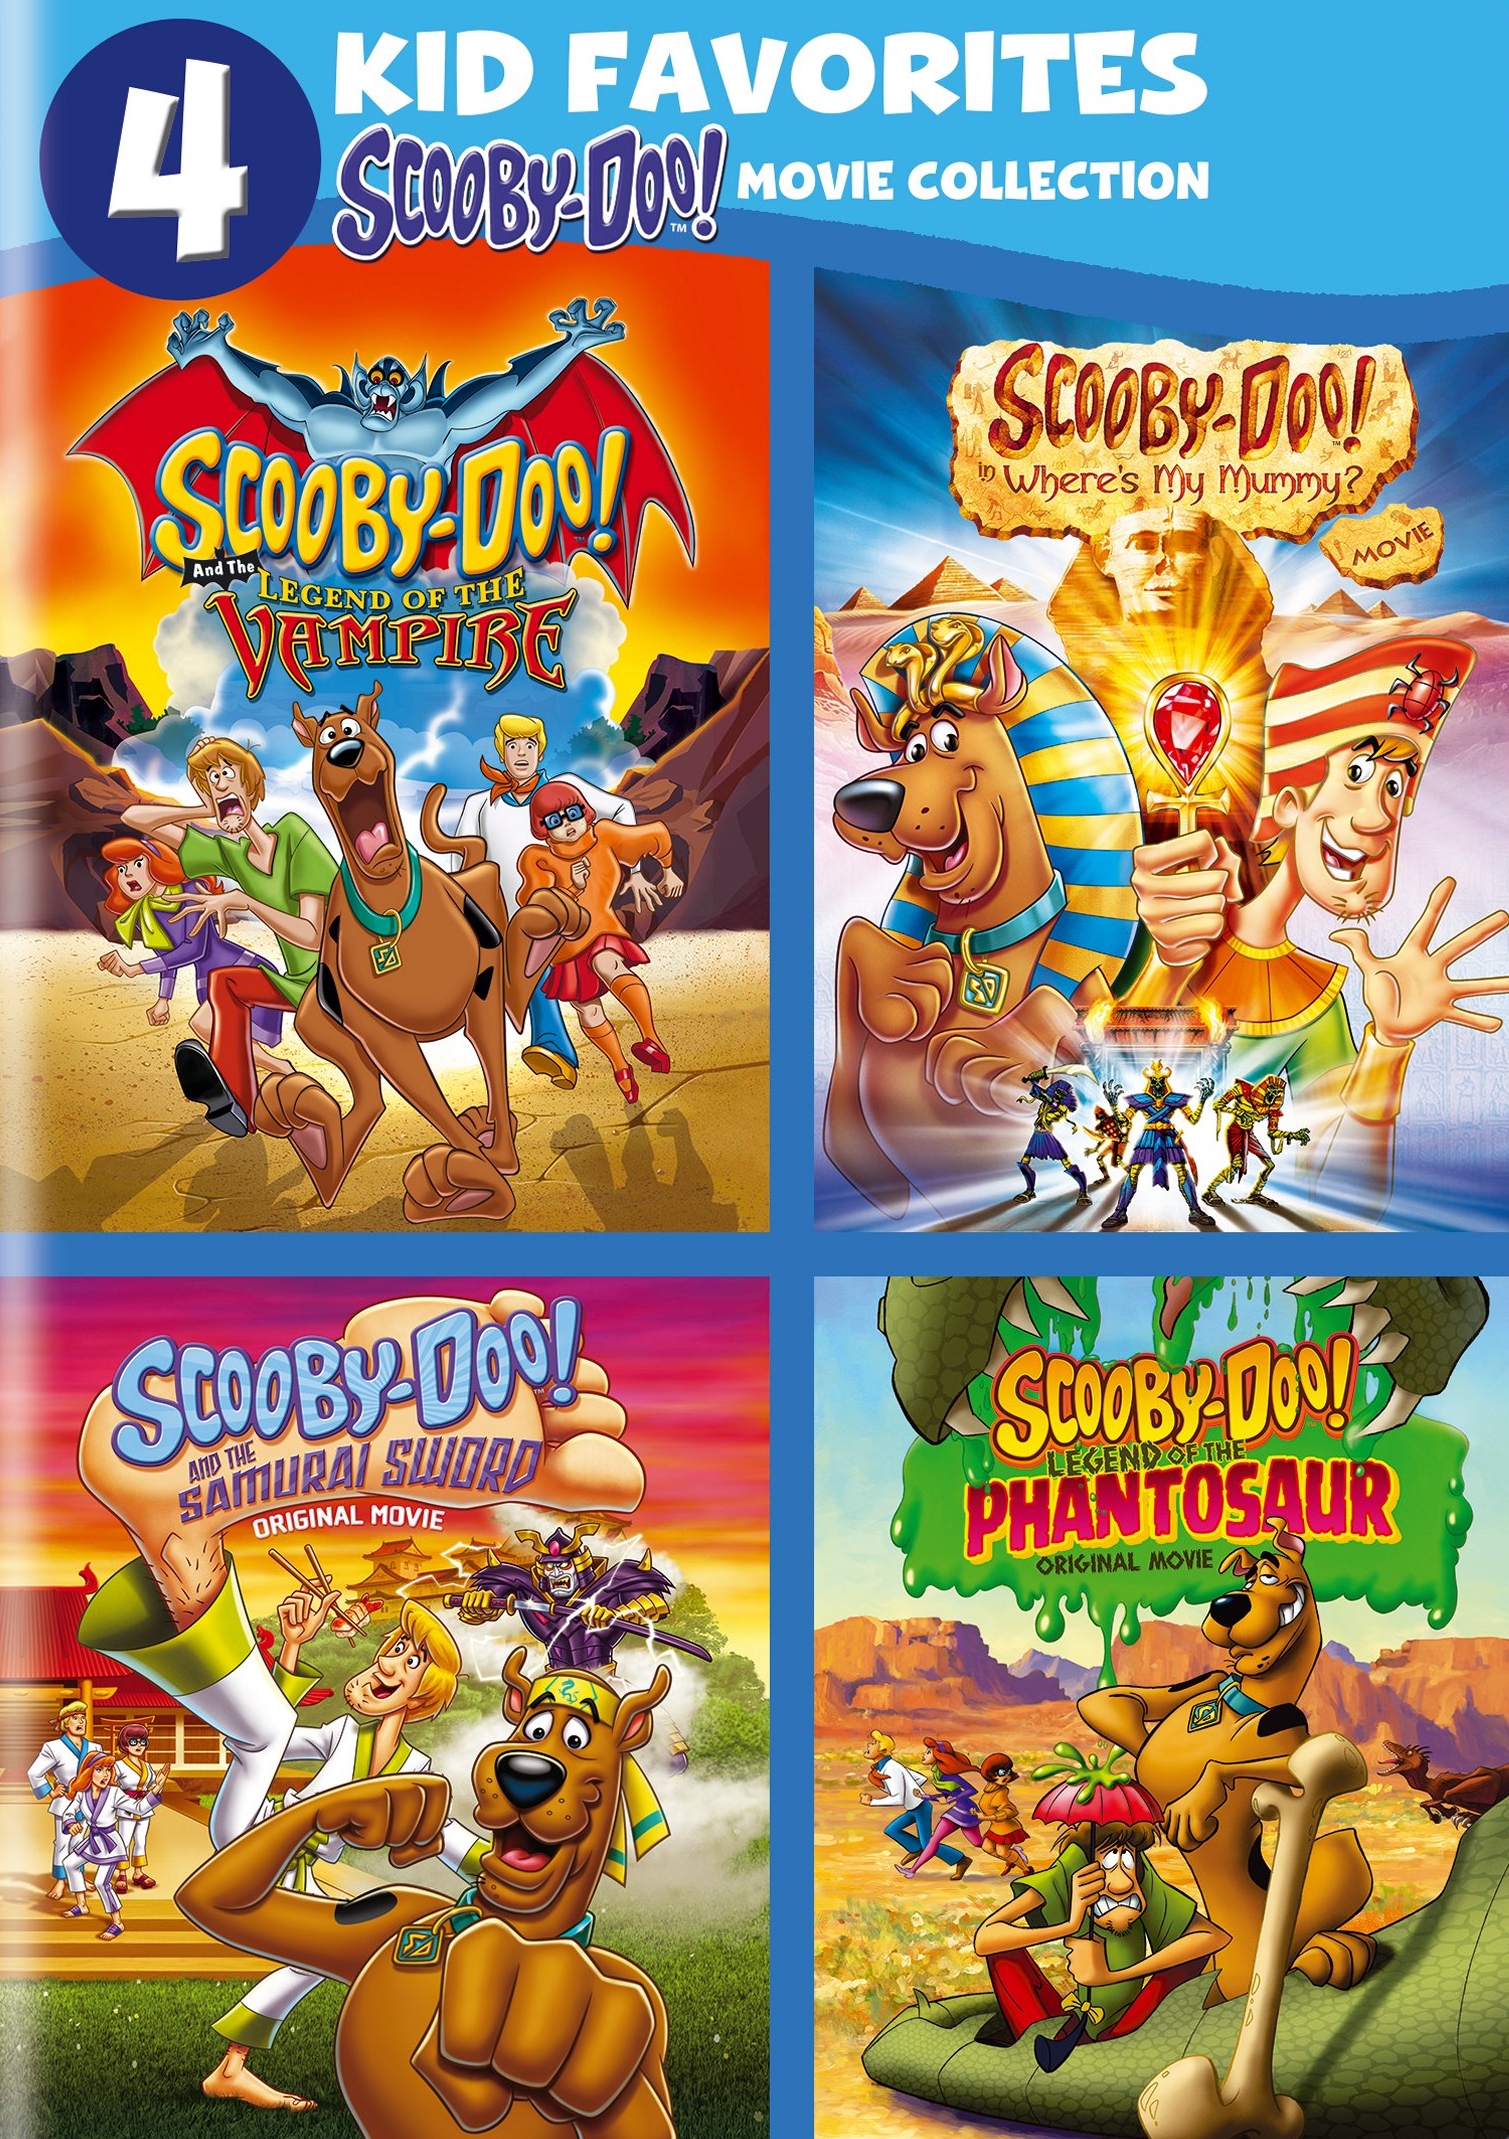 4 Kids Favorites: Scooby Doo! Movie Collection [DVD]